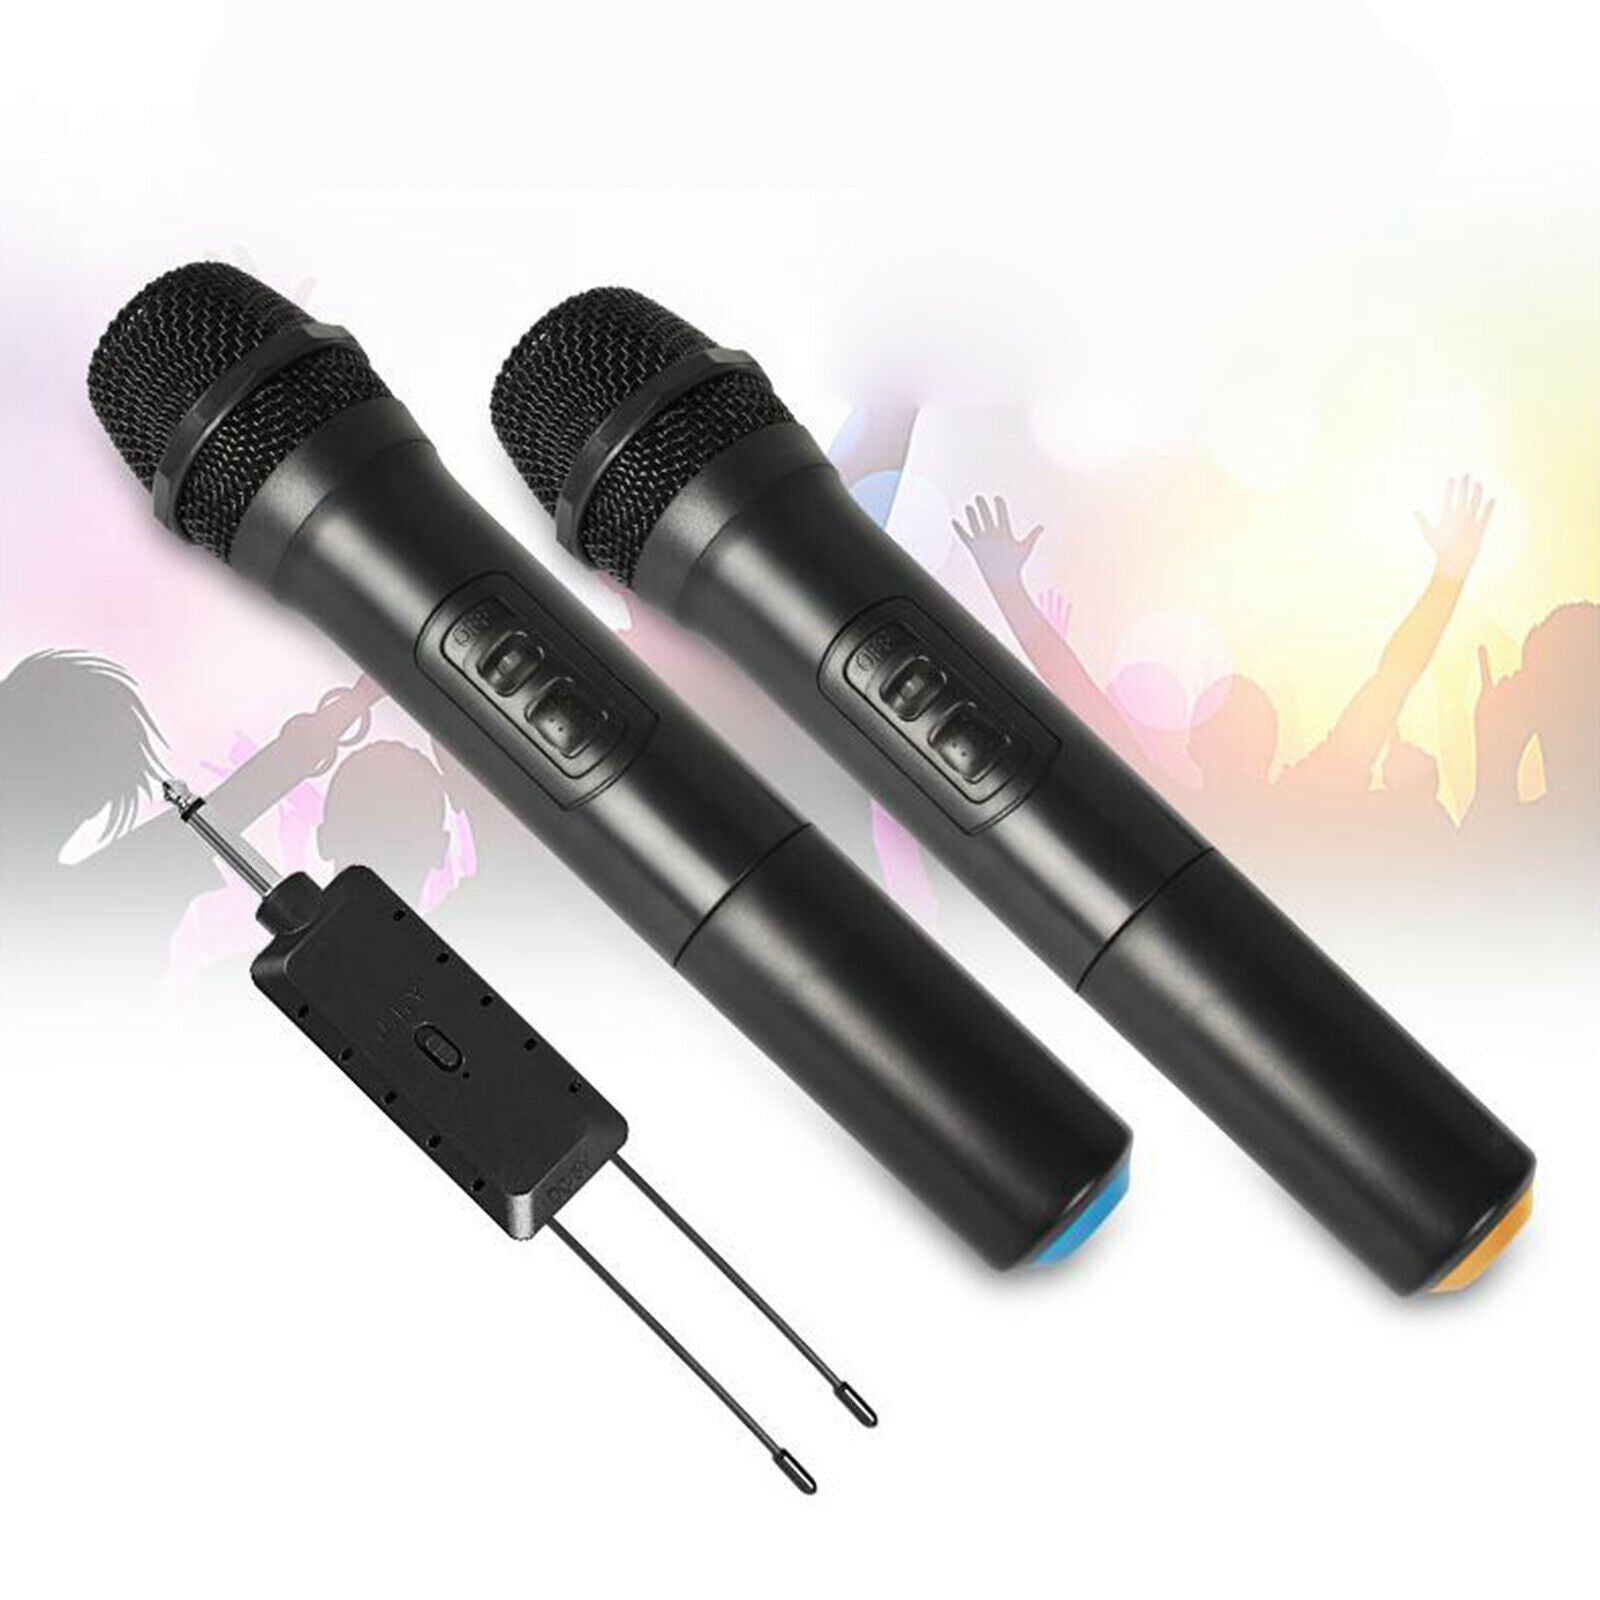 Wireless Microphone Mic System Set with Receiver for Home Karaoke Speech